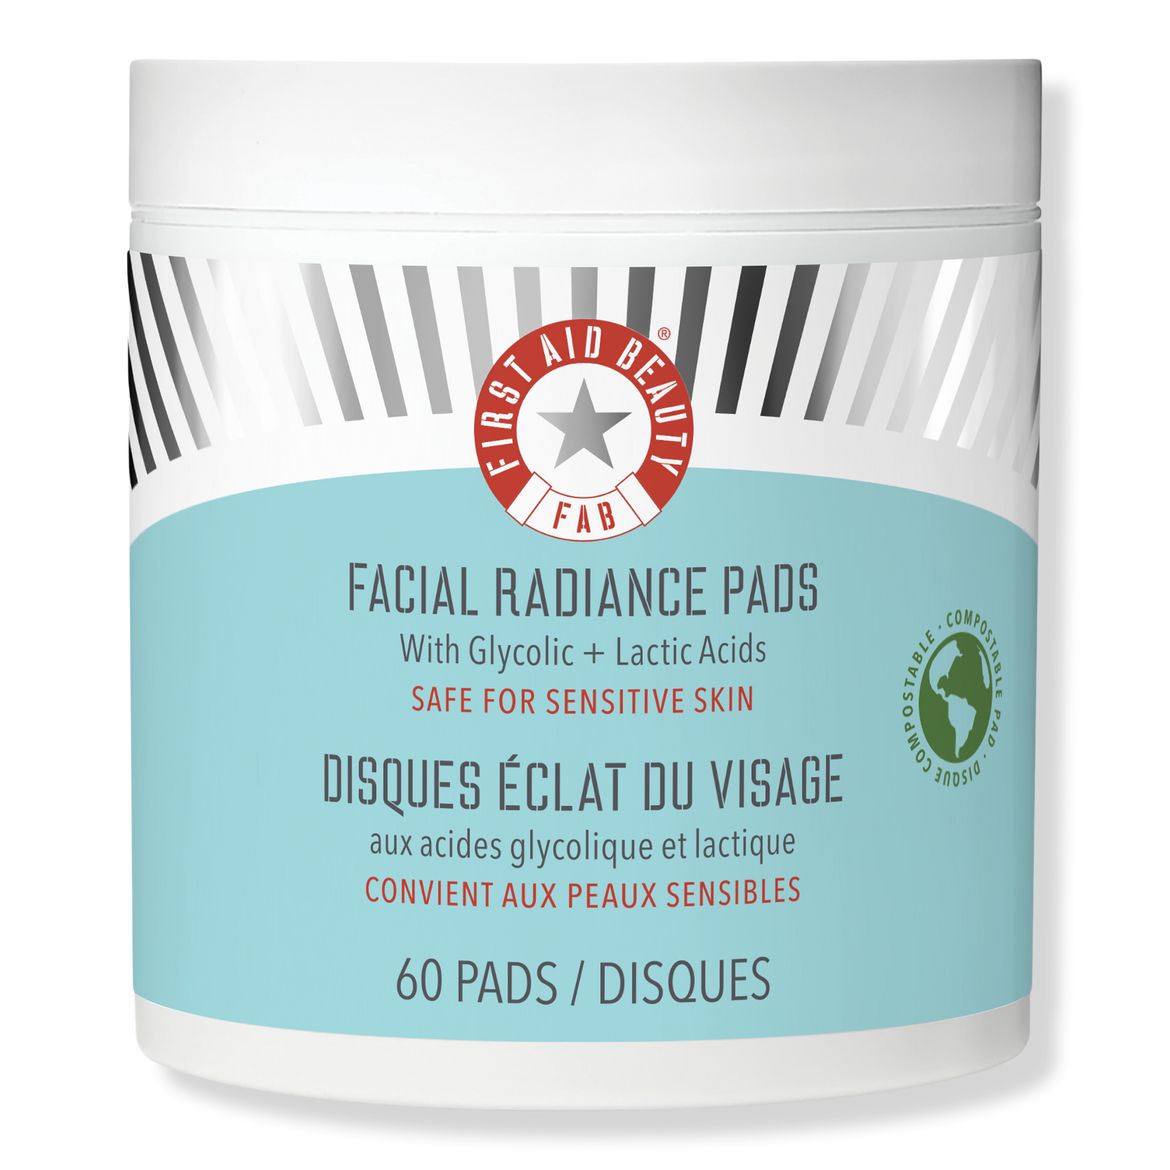 Facial Radiance Pads with Glycolic + Lactic Acids | Ulta